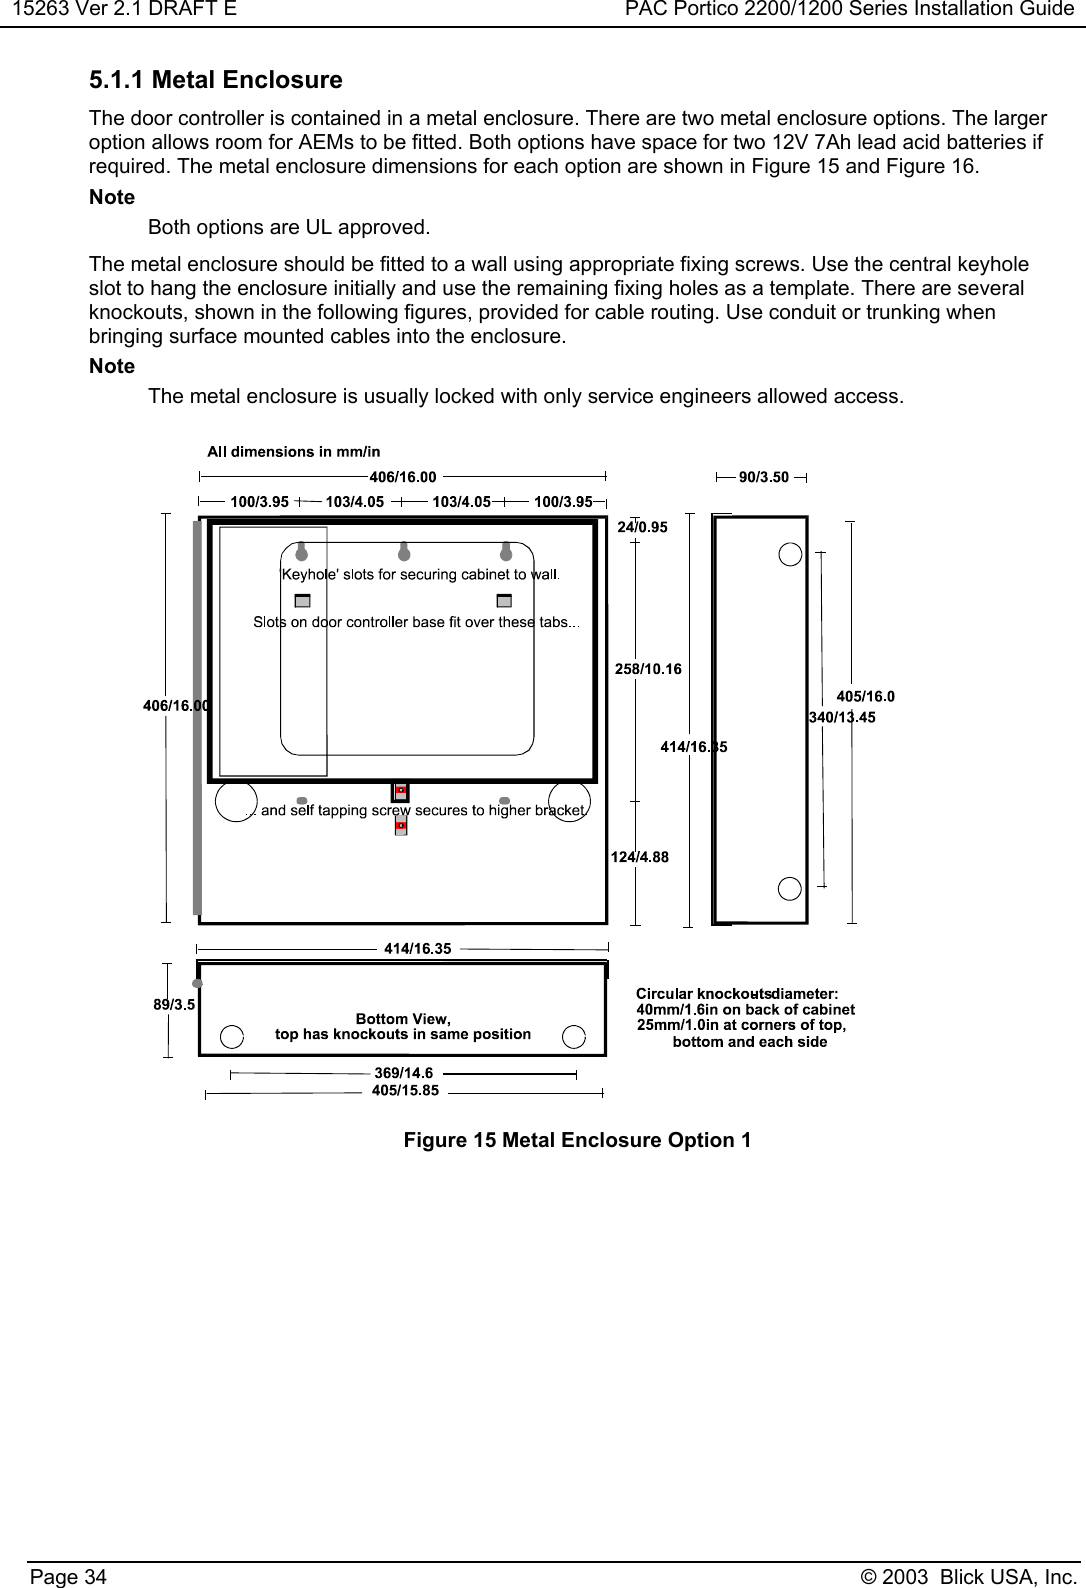 15263 Ver 2.1 DRAFT E PAC Portico 2200/1200 Series Installation GuidePage 34 © 2003  Blick USA, Inc.5.1.1 Metal EnclosureThe door controller is contained in a metal enclosure. There are two metal enclosure options. The largeroption allows room for AEMs to be fitted. Both options have space for two 12V 7Ah lead acid batteries ifrequired. The metal enclosure dimensions for each option are shown in Figure 15 and Figure 16.NoteBoth options are UL approved.The metal enclosure should be fitted to a wall using appropriate fixing screws. Use the central keyholeslot to hang the enclosure initially and use the remaining fixing holes as a template. There are severalknockouts, shown in the following figures, provided for cable routing. Use conduit or trunking whenbringing surface mounted cables into the enclosure.NoteThe metal enclosure is usually locked with only service engineers allowed access.Figure 15 Metal Enclosure Option 1